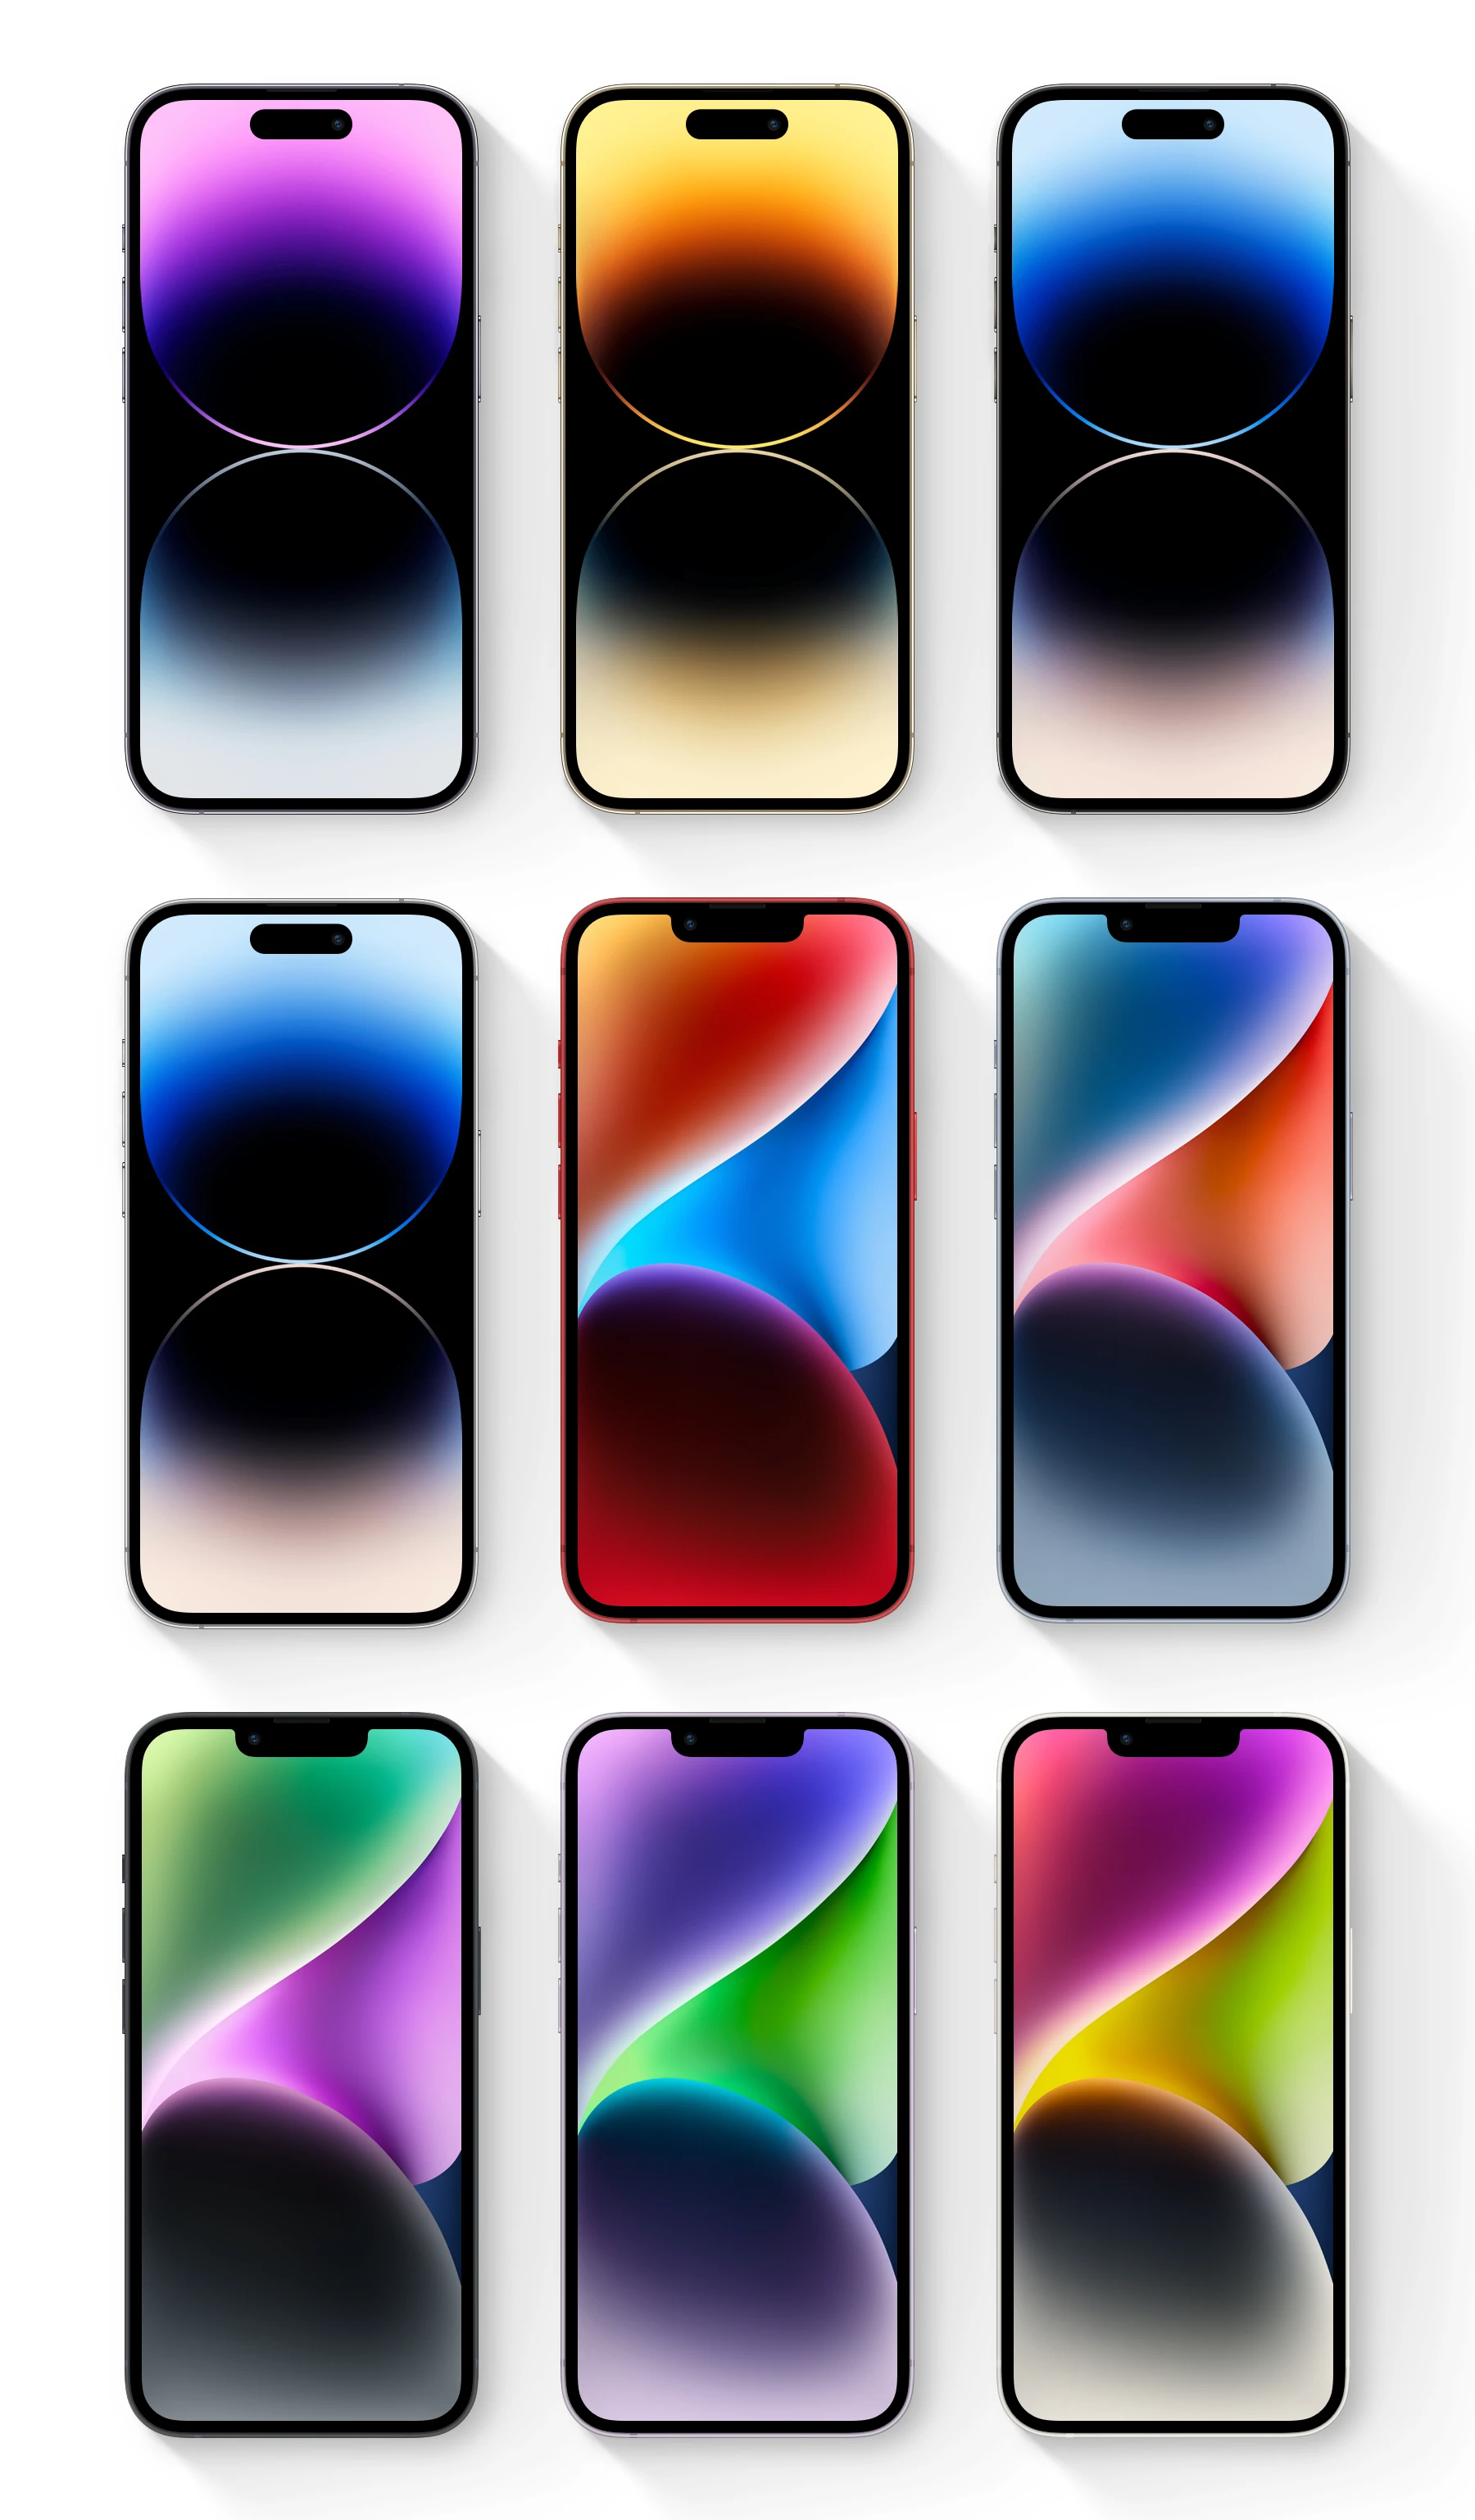 Free iPhone 14 Mockups for Sketch - Meet new iPhone 14 in official colors. The realistic render with curves, shadows, new textures and depth of field make it a great tool to showcase your designs.